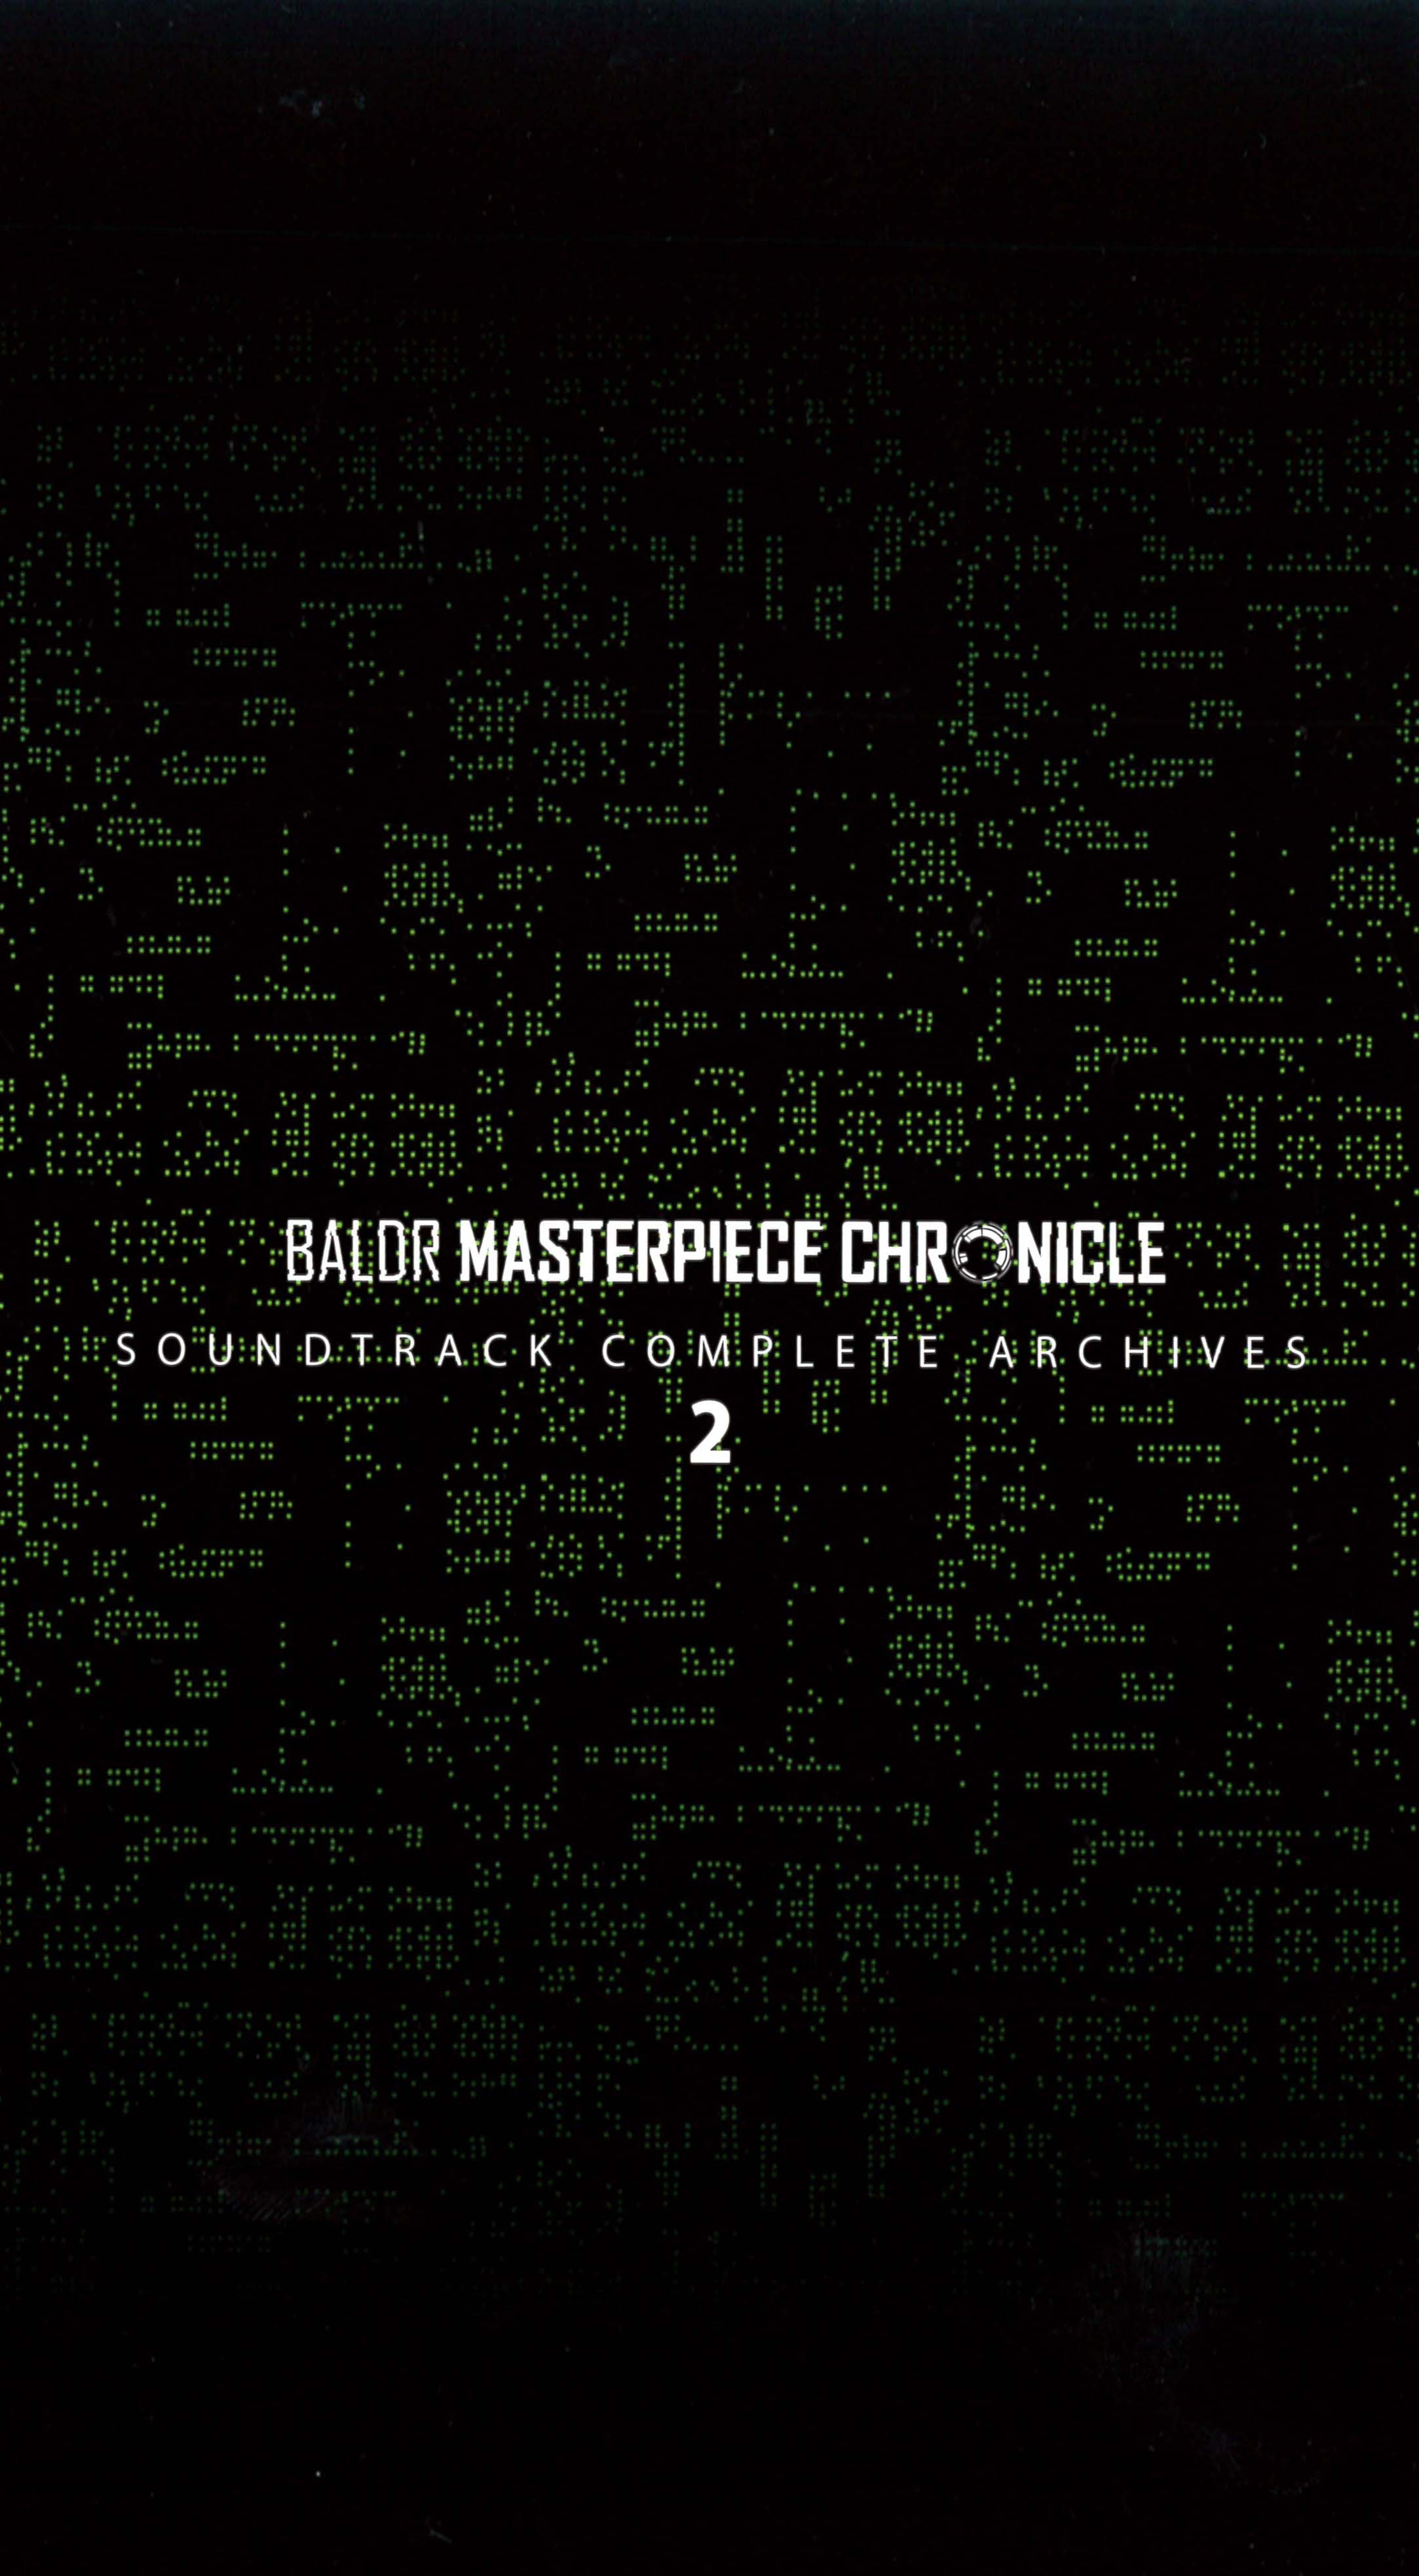 BALDR MASTERPIECE CHRONICLE Complete Vocal Collection u0026amp; Soundtrack:  Complete Archives (2017) MP3 - Video Game Music